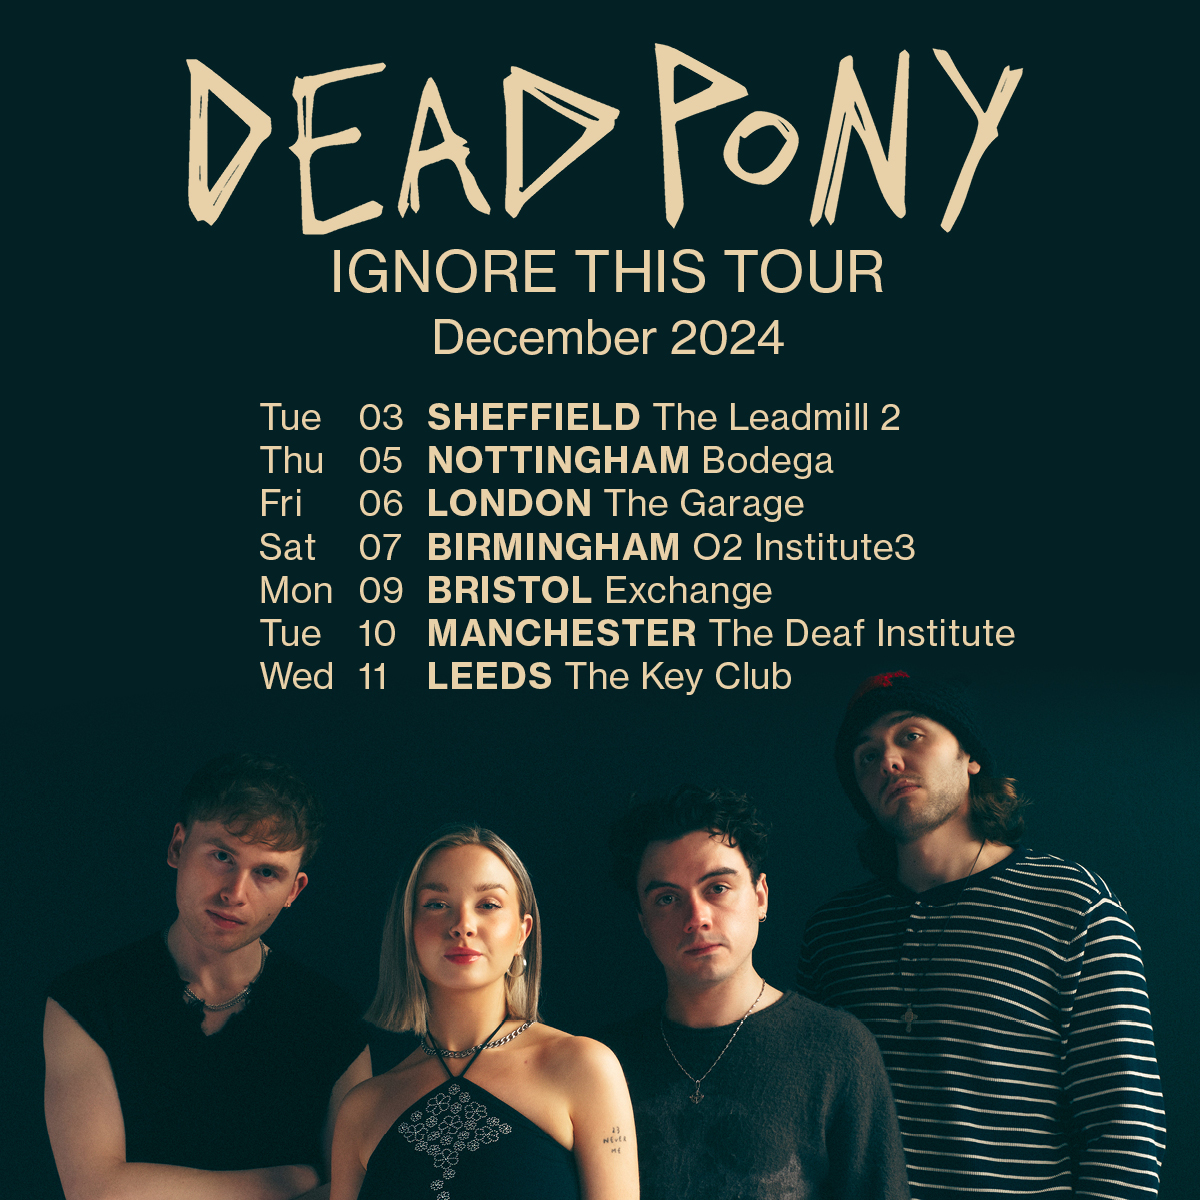 Don't miss @deadponyband live in Birmingham - Saturday 07 December! Priority Tickets on sale now - amg-venues.com/aeFI50RkWYU